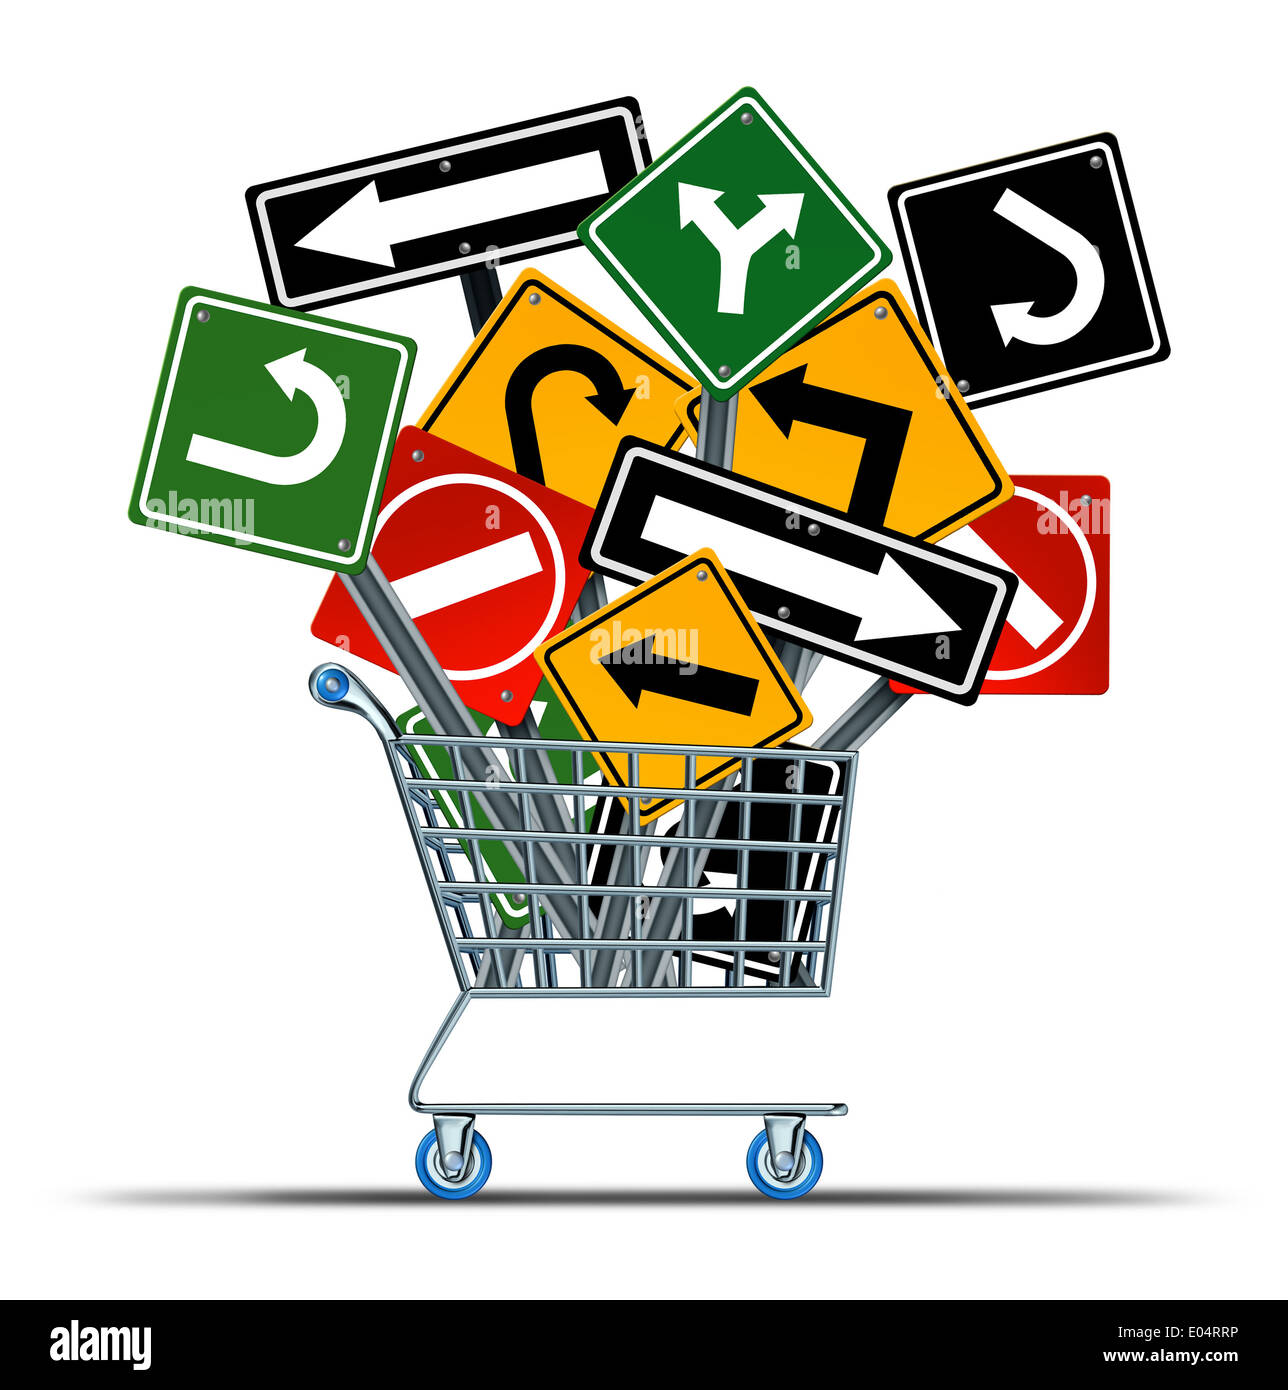 Shopping direction business acquisition concept and consumer guide to sales as a shop cart with a group of confusing traffic signs as a metaphor for marketing strategy and retail industry guidance. Stock Photo